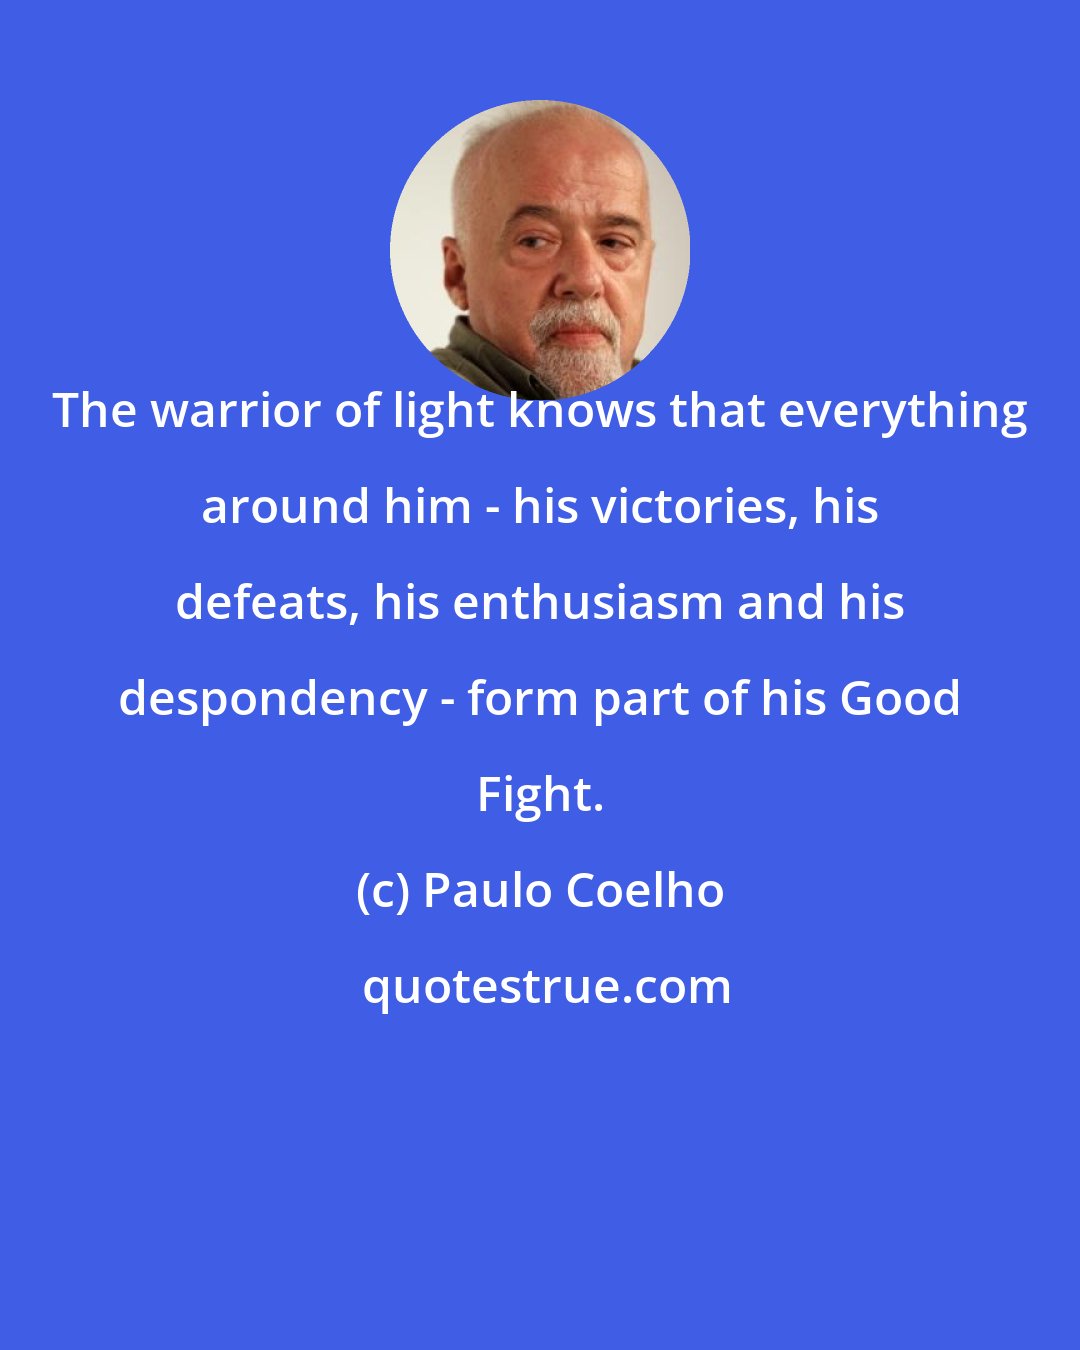 Paulo Coelho: The warrior of light knows that everything around him - his victories, his defeats, his enthusiasm and his despondency - form part of his Good Fight.